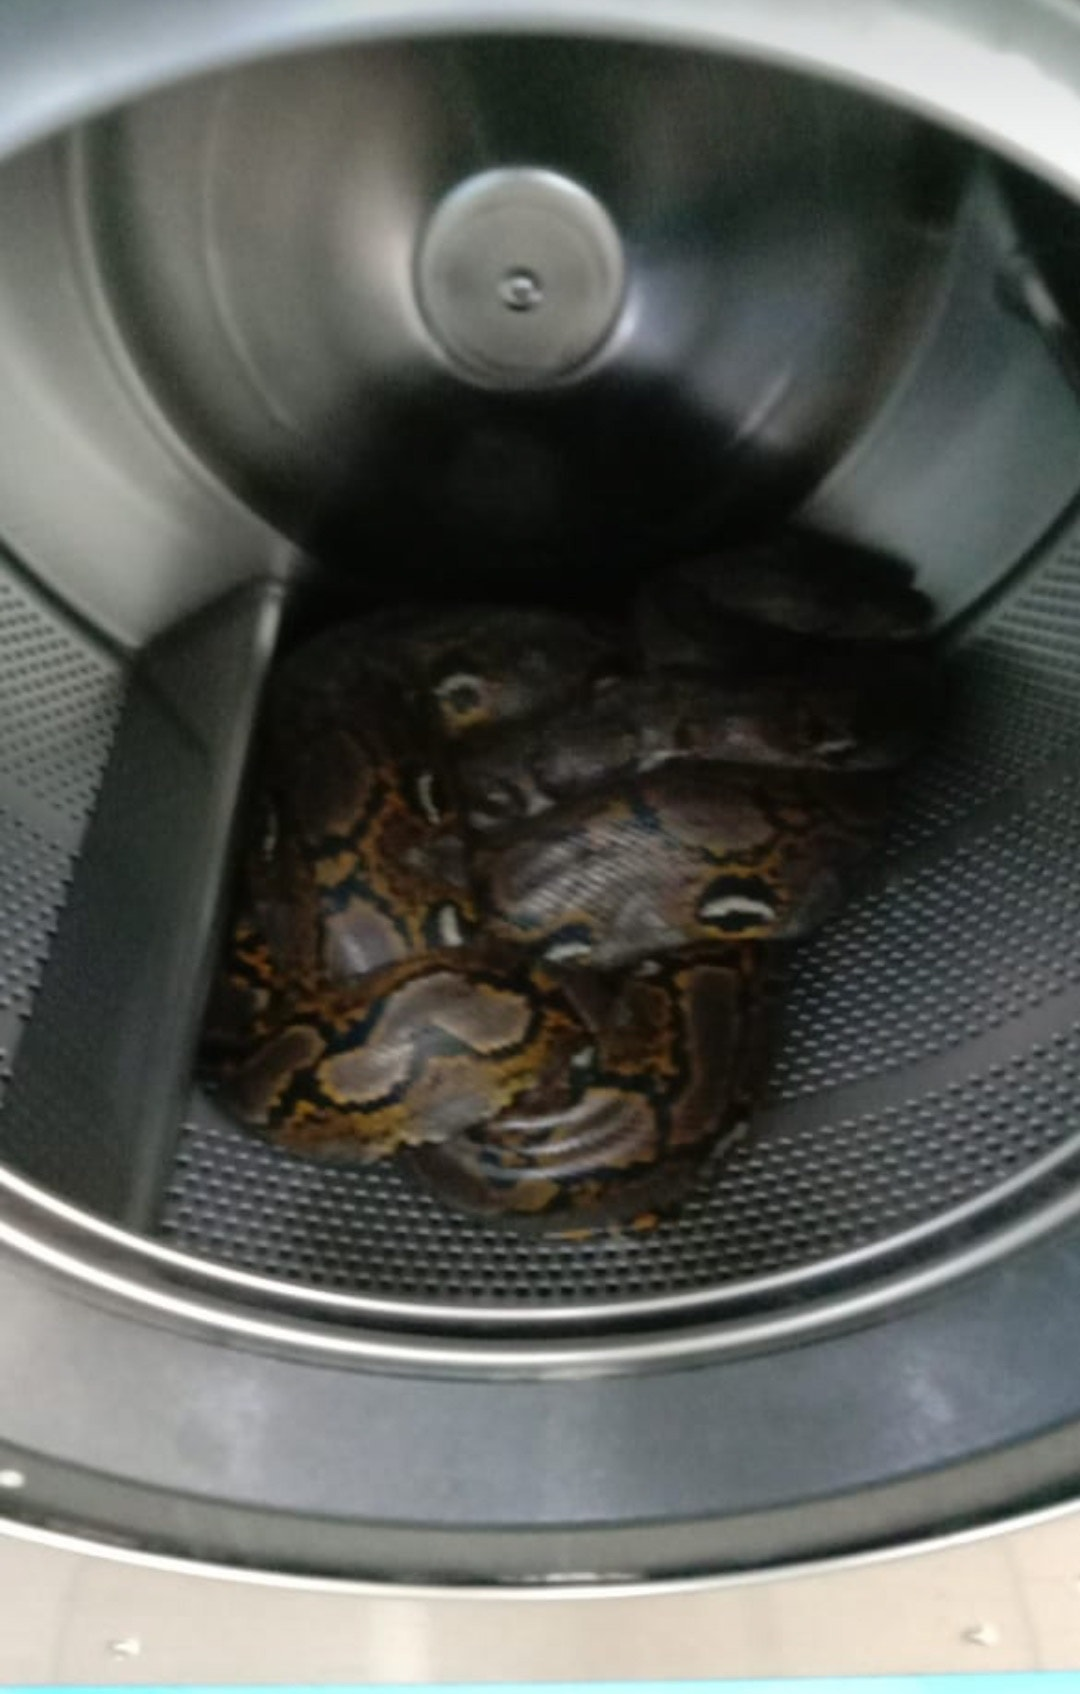 20kg python found inside washing machine at a laundromat in johor